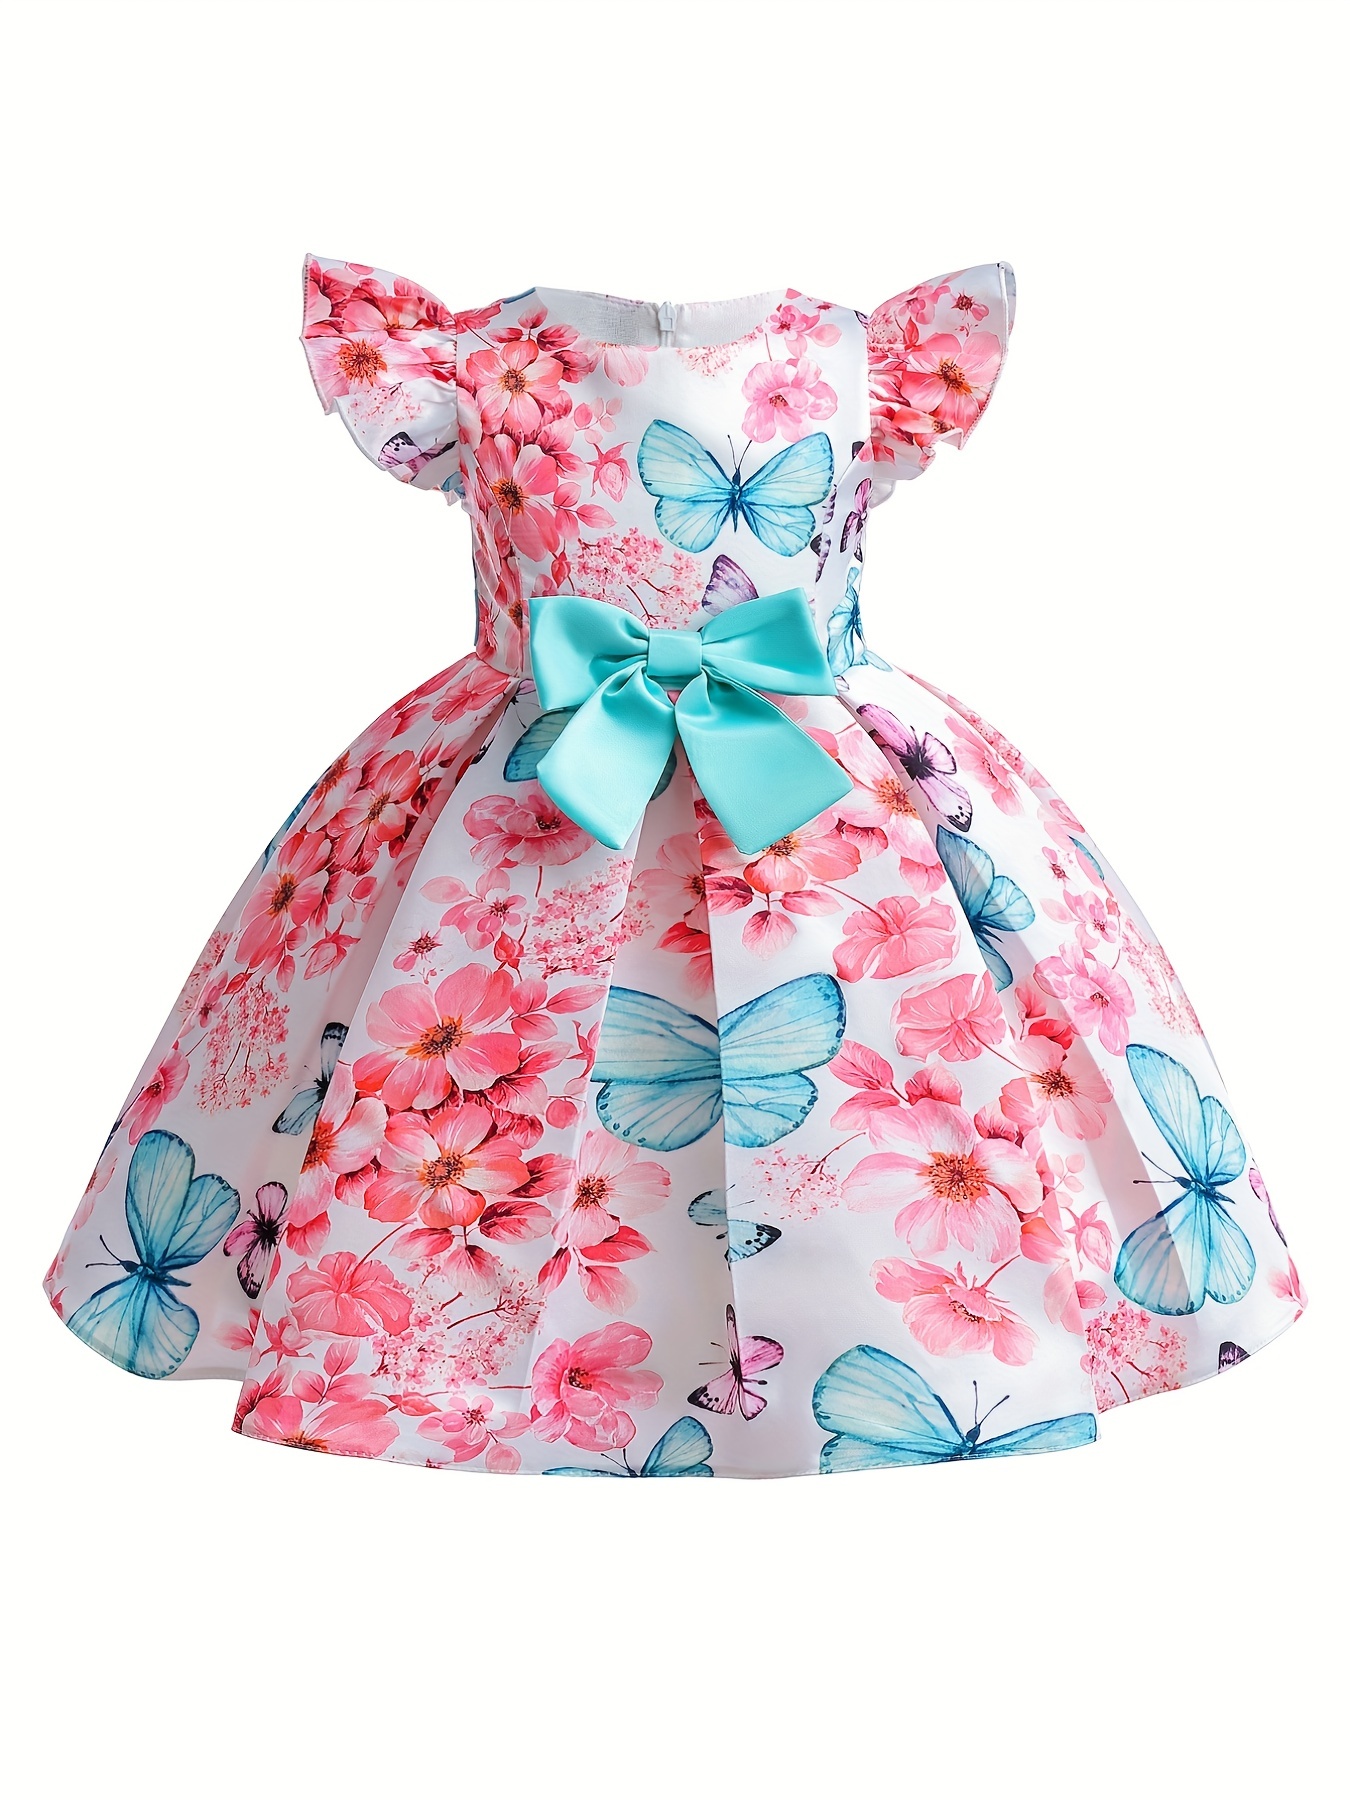 Girls Dress Summer Floral Princess Clothing Mesh costume Kids Baby Children  Party wedding Beautiful Dresses For Girl Clothes 3y